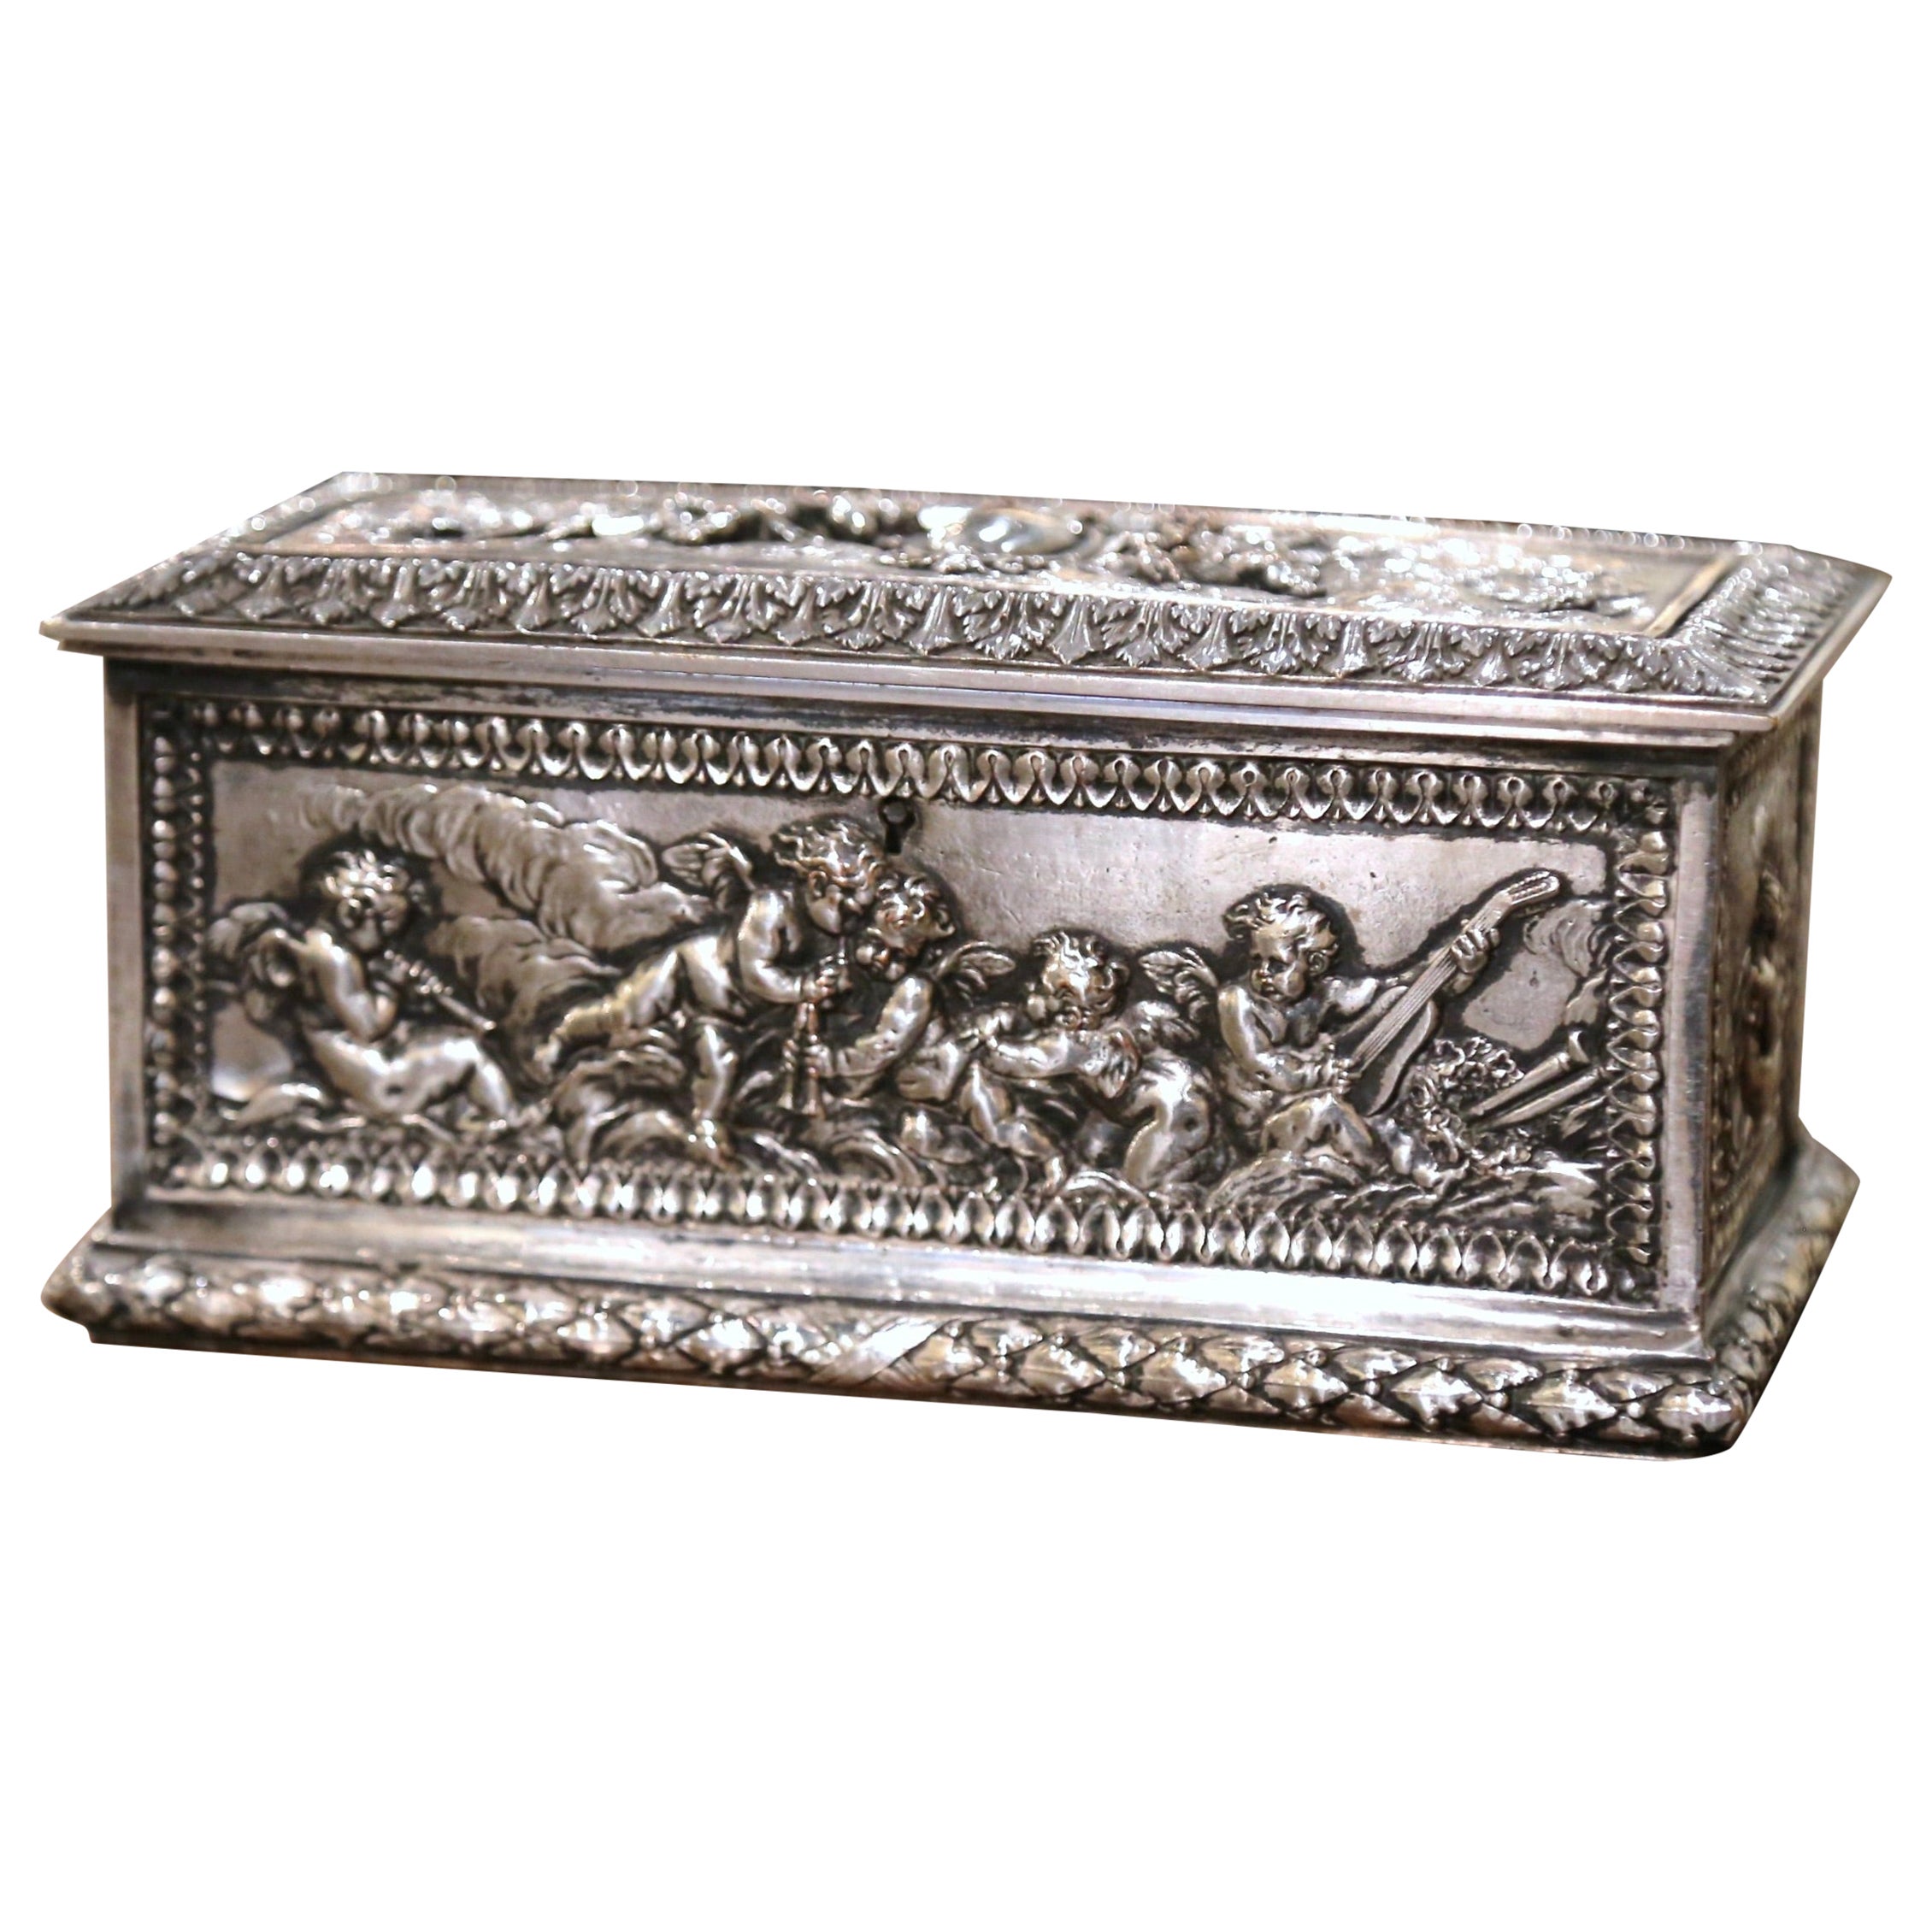 19th Century French Repousse Silver Plated on Copper Jewelry Box